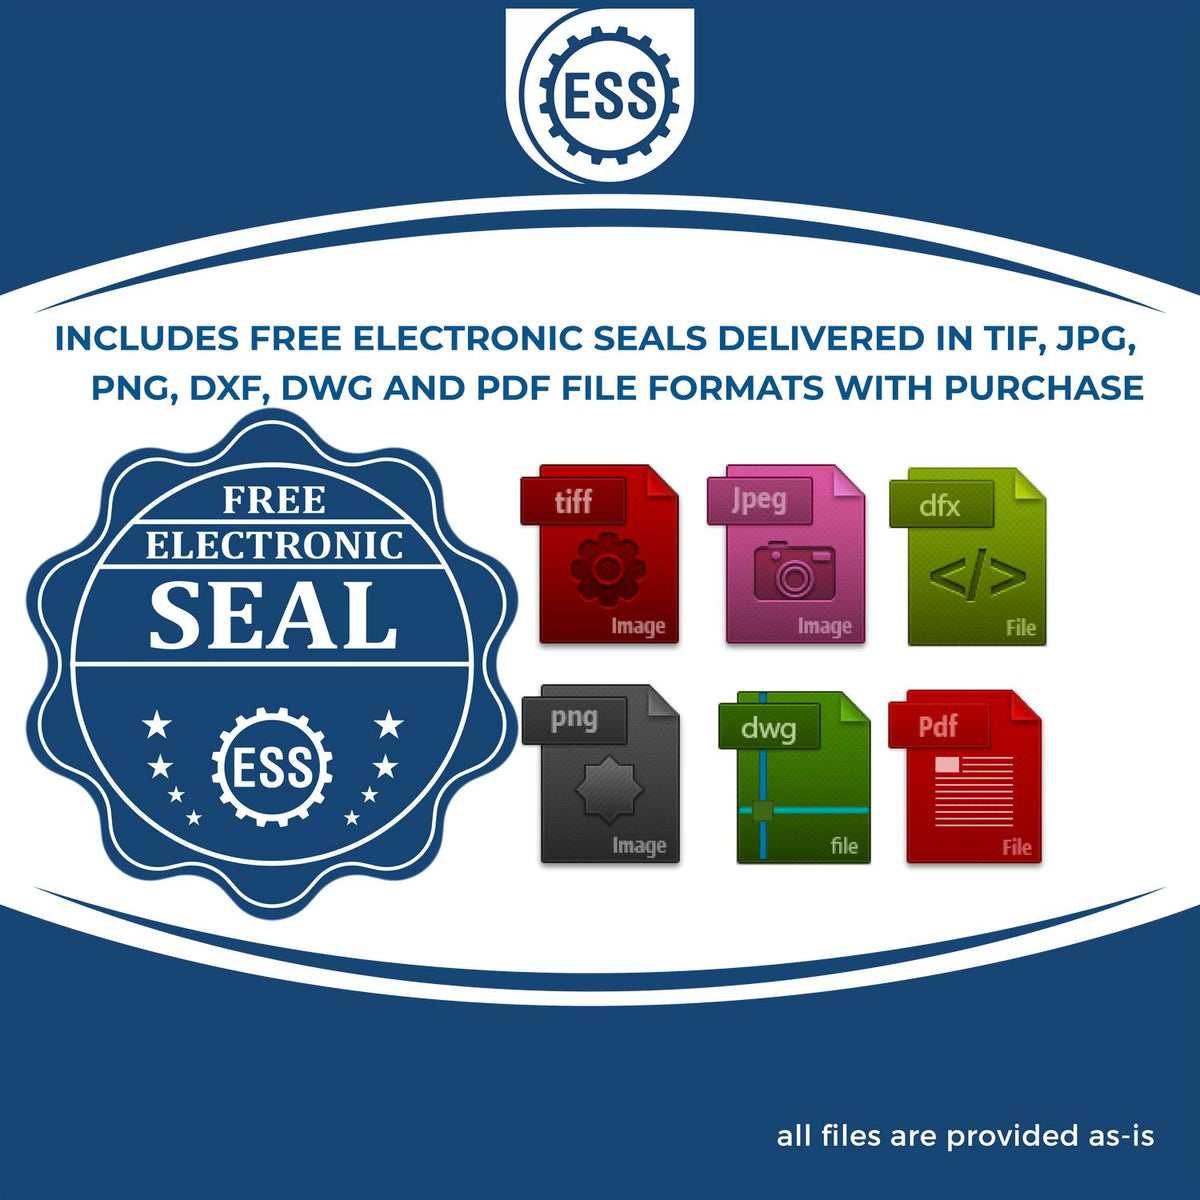 An infographic for the free electronic seal for the Self-Inking State Seal Montana Notary Stamp illustrating the different file type icons such as DXF, DWG, TIF, JPG and PNG.